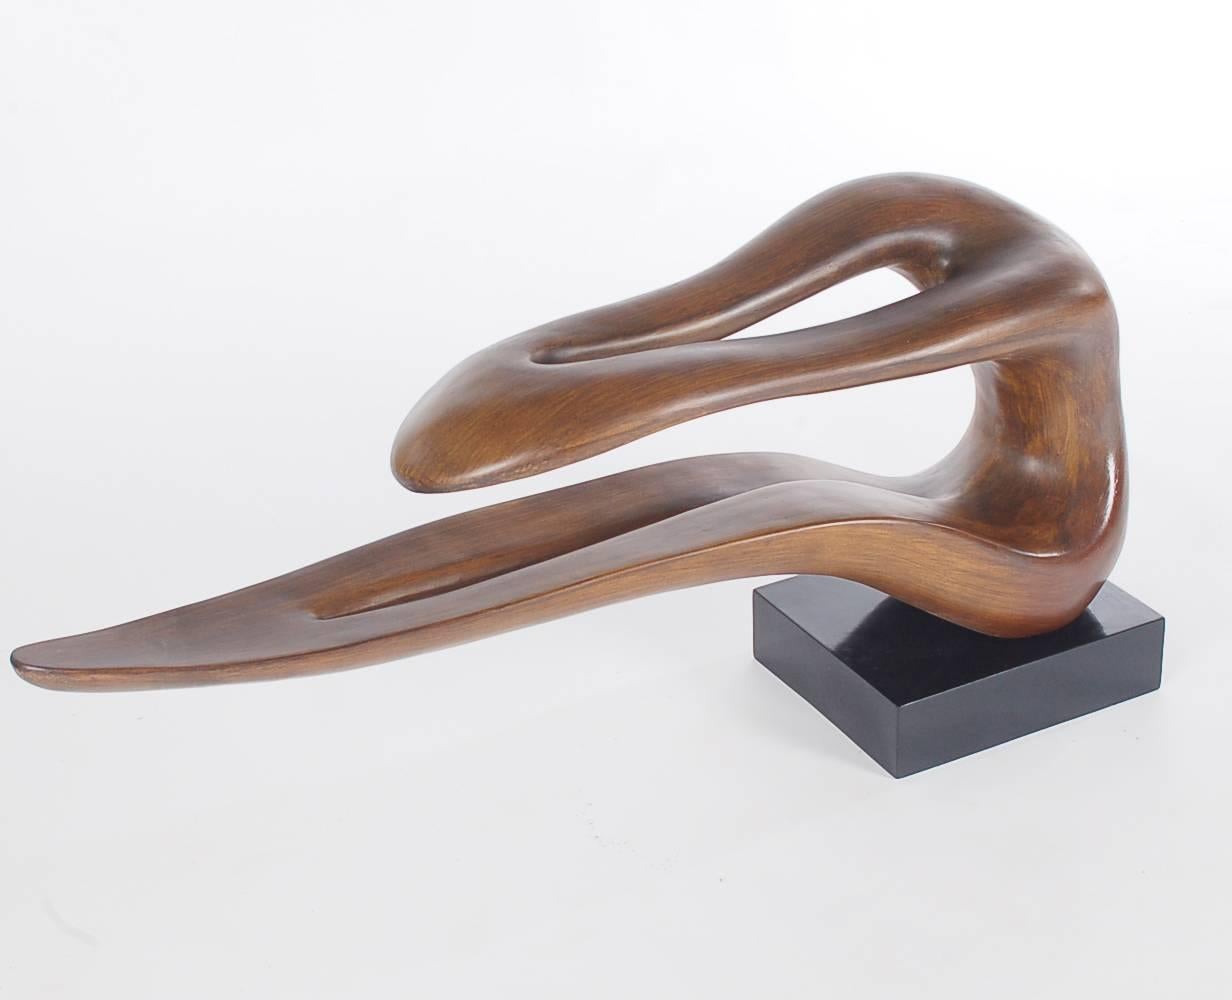 Unknown Organic Mid-Century Modern Free-Form Table Sculpture